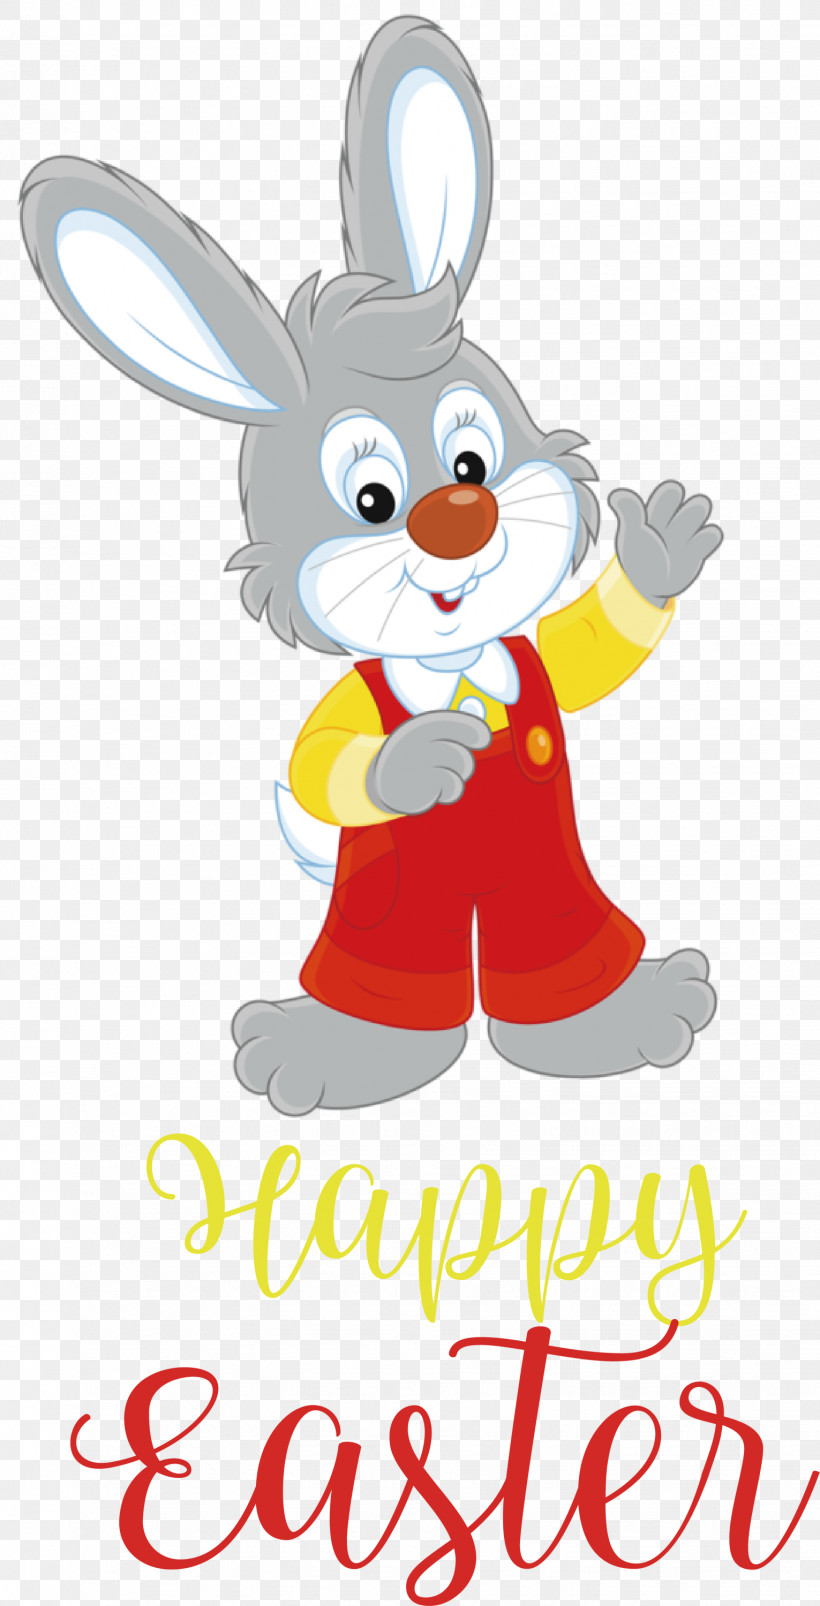 Happy Easter Day Easter Day Blessing Easter Bunny, PNG, 1531x3000px, Happy Easter Day, Cute Easter, Easter Basket, Easter Bunny, Easter Egg Download Free